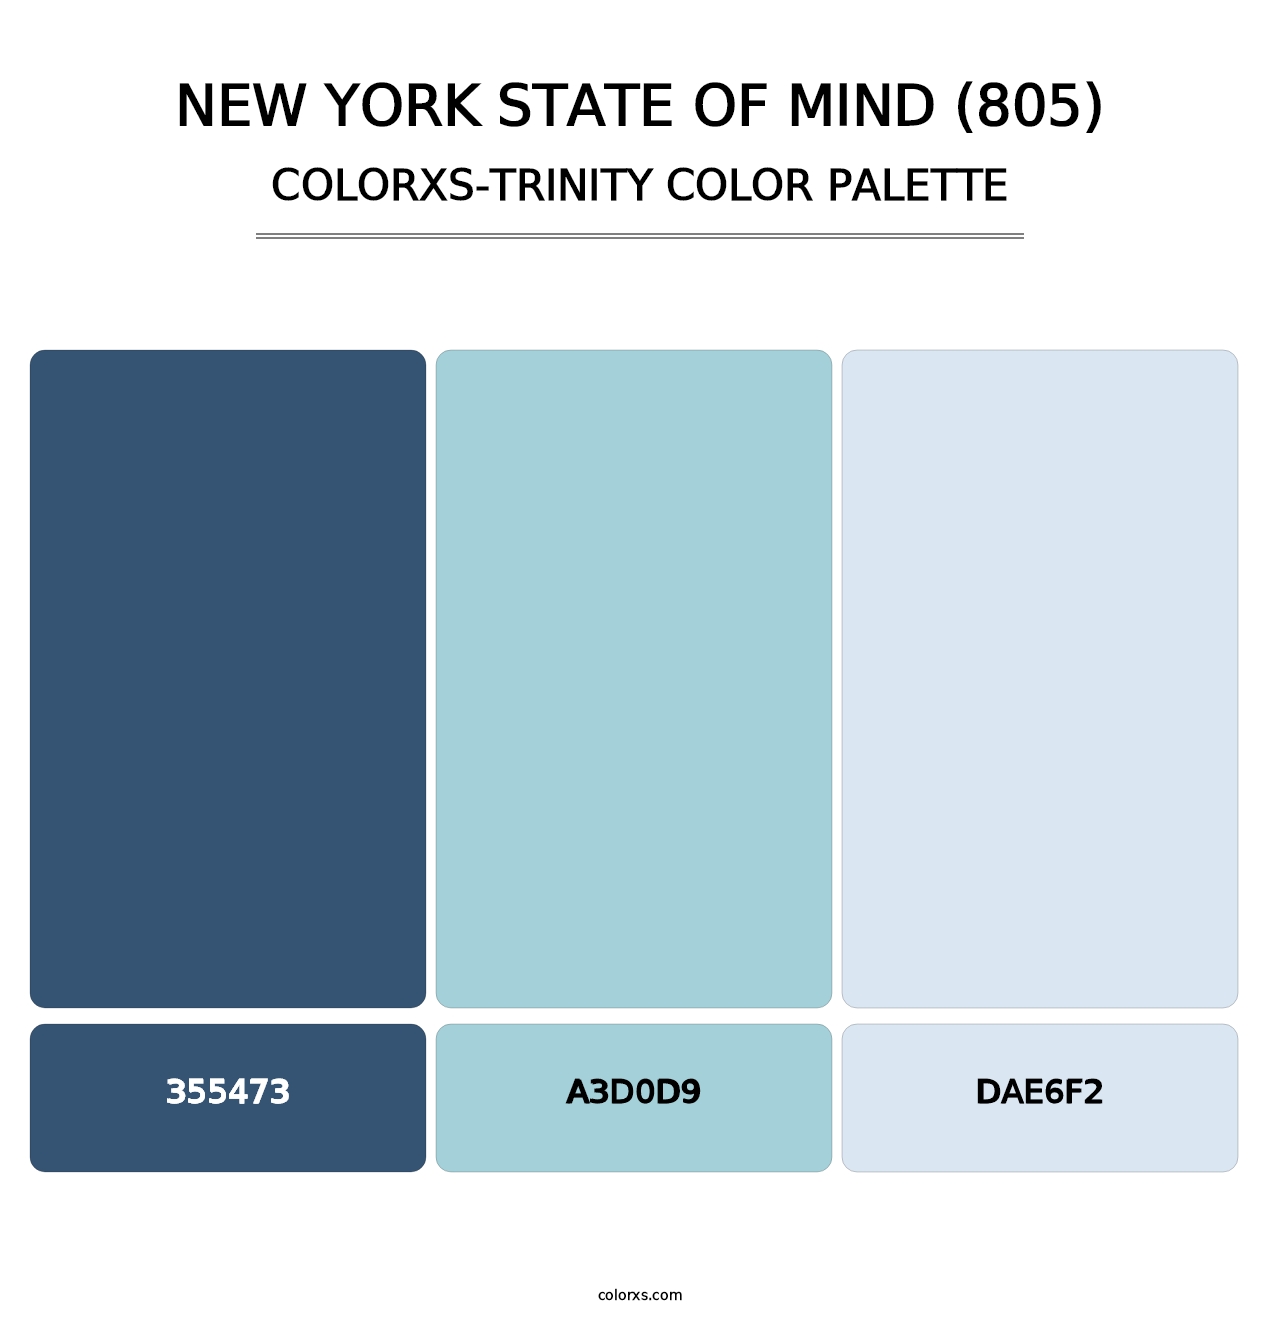 New York State of Mind (805) - Colorxs Trinity Palette